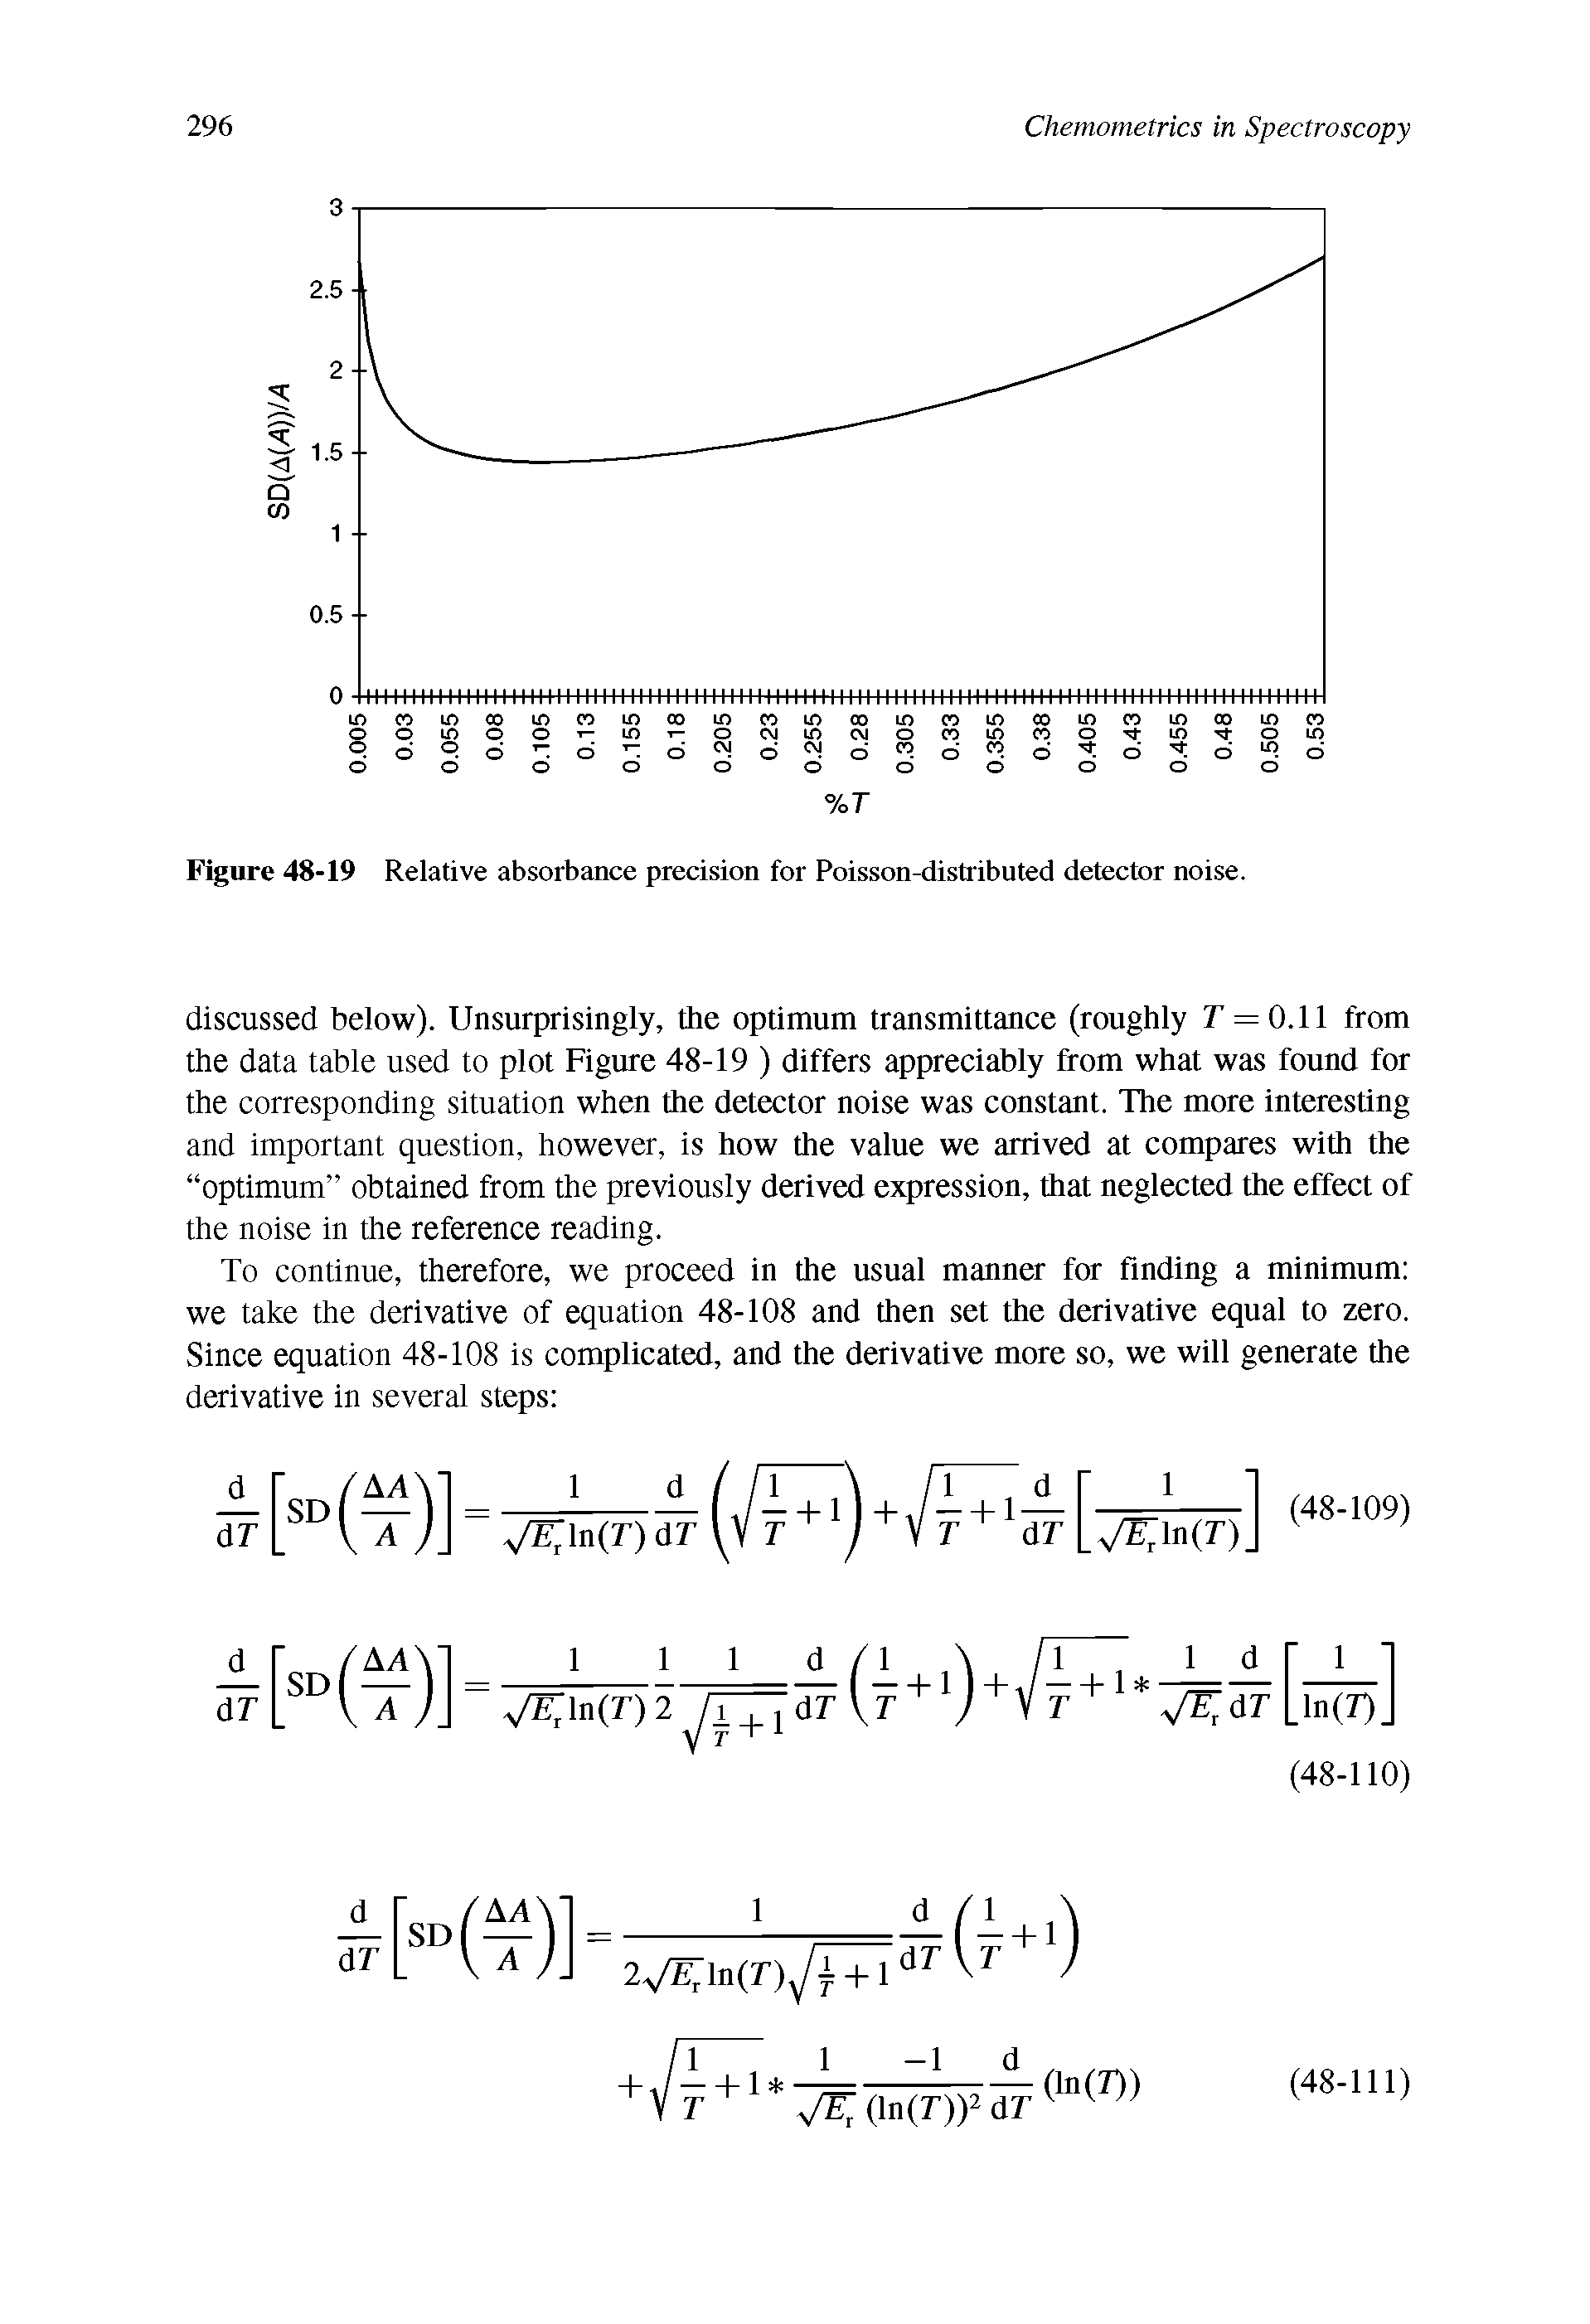 Figure 48-19 Relative absorbance precision for Poisson-distributed detector noise.